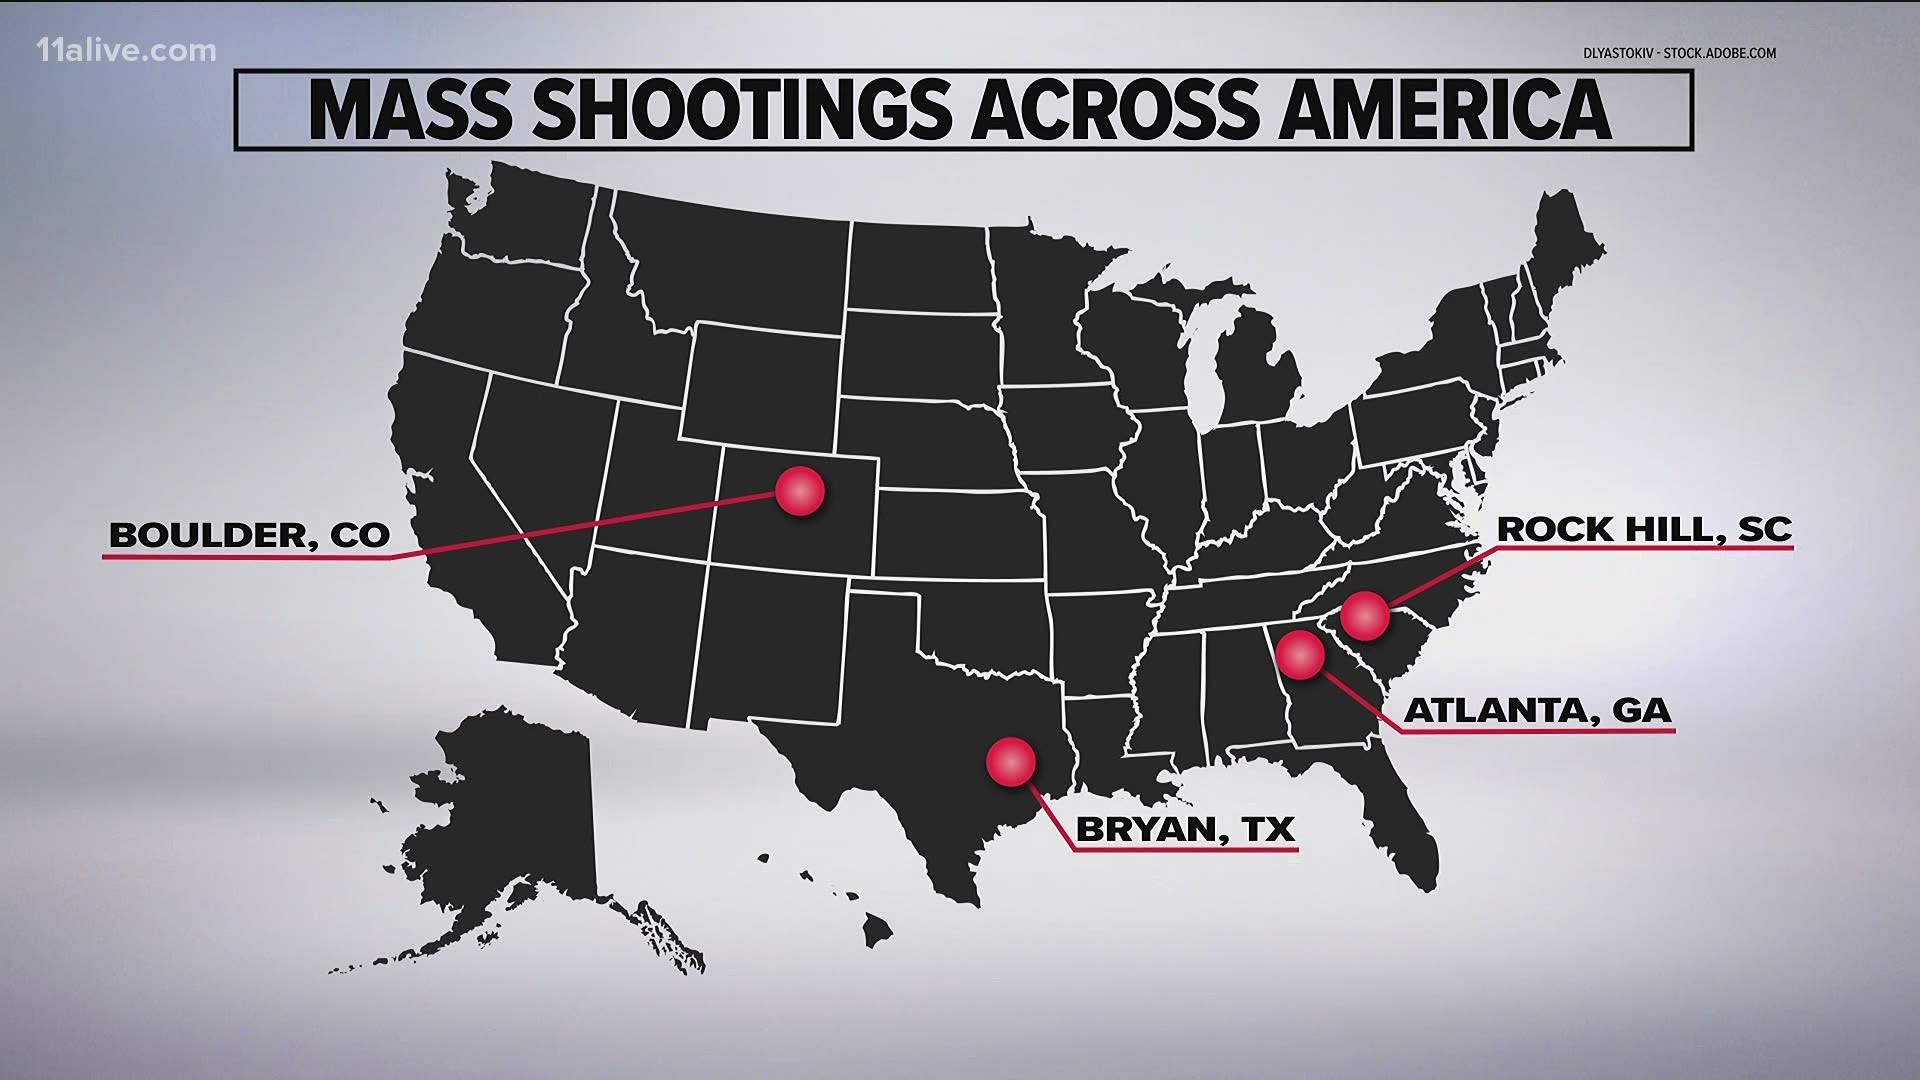 The shooting in Indianapolis is just the latest in a string of mass shootings across America.